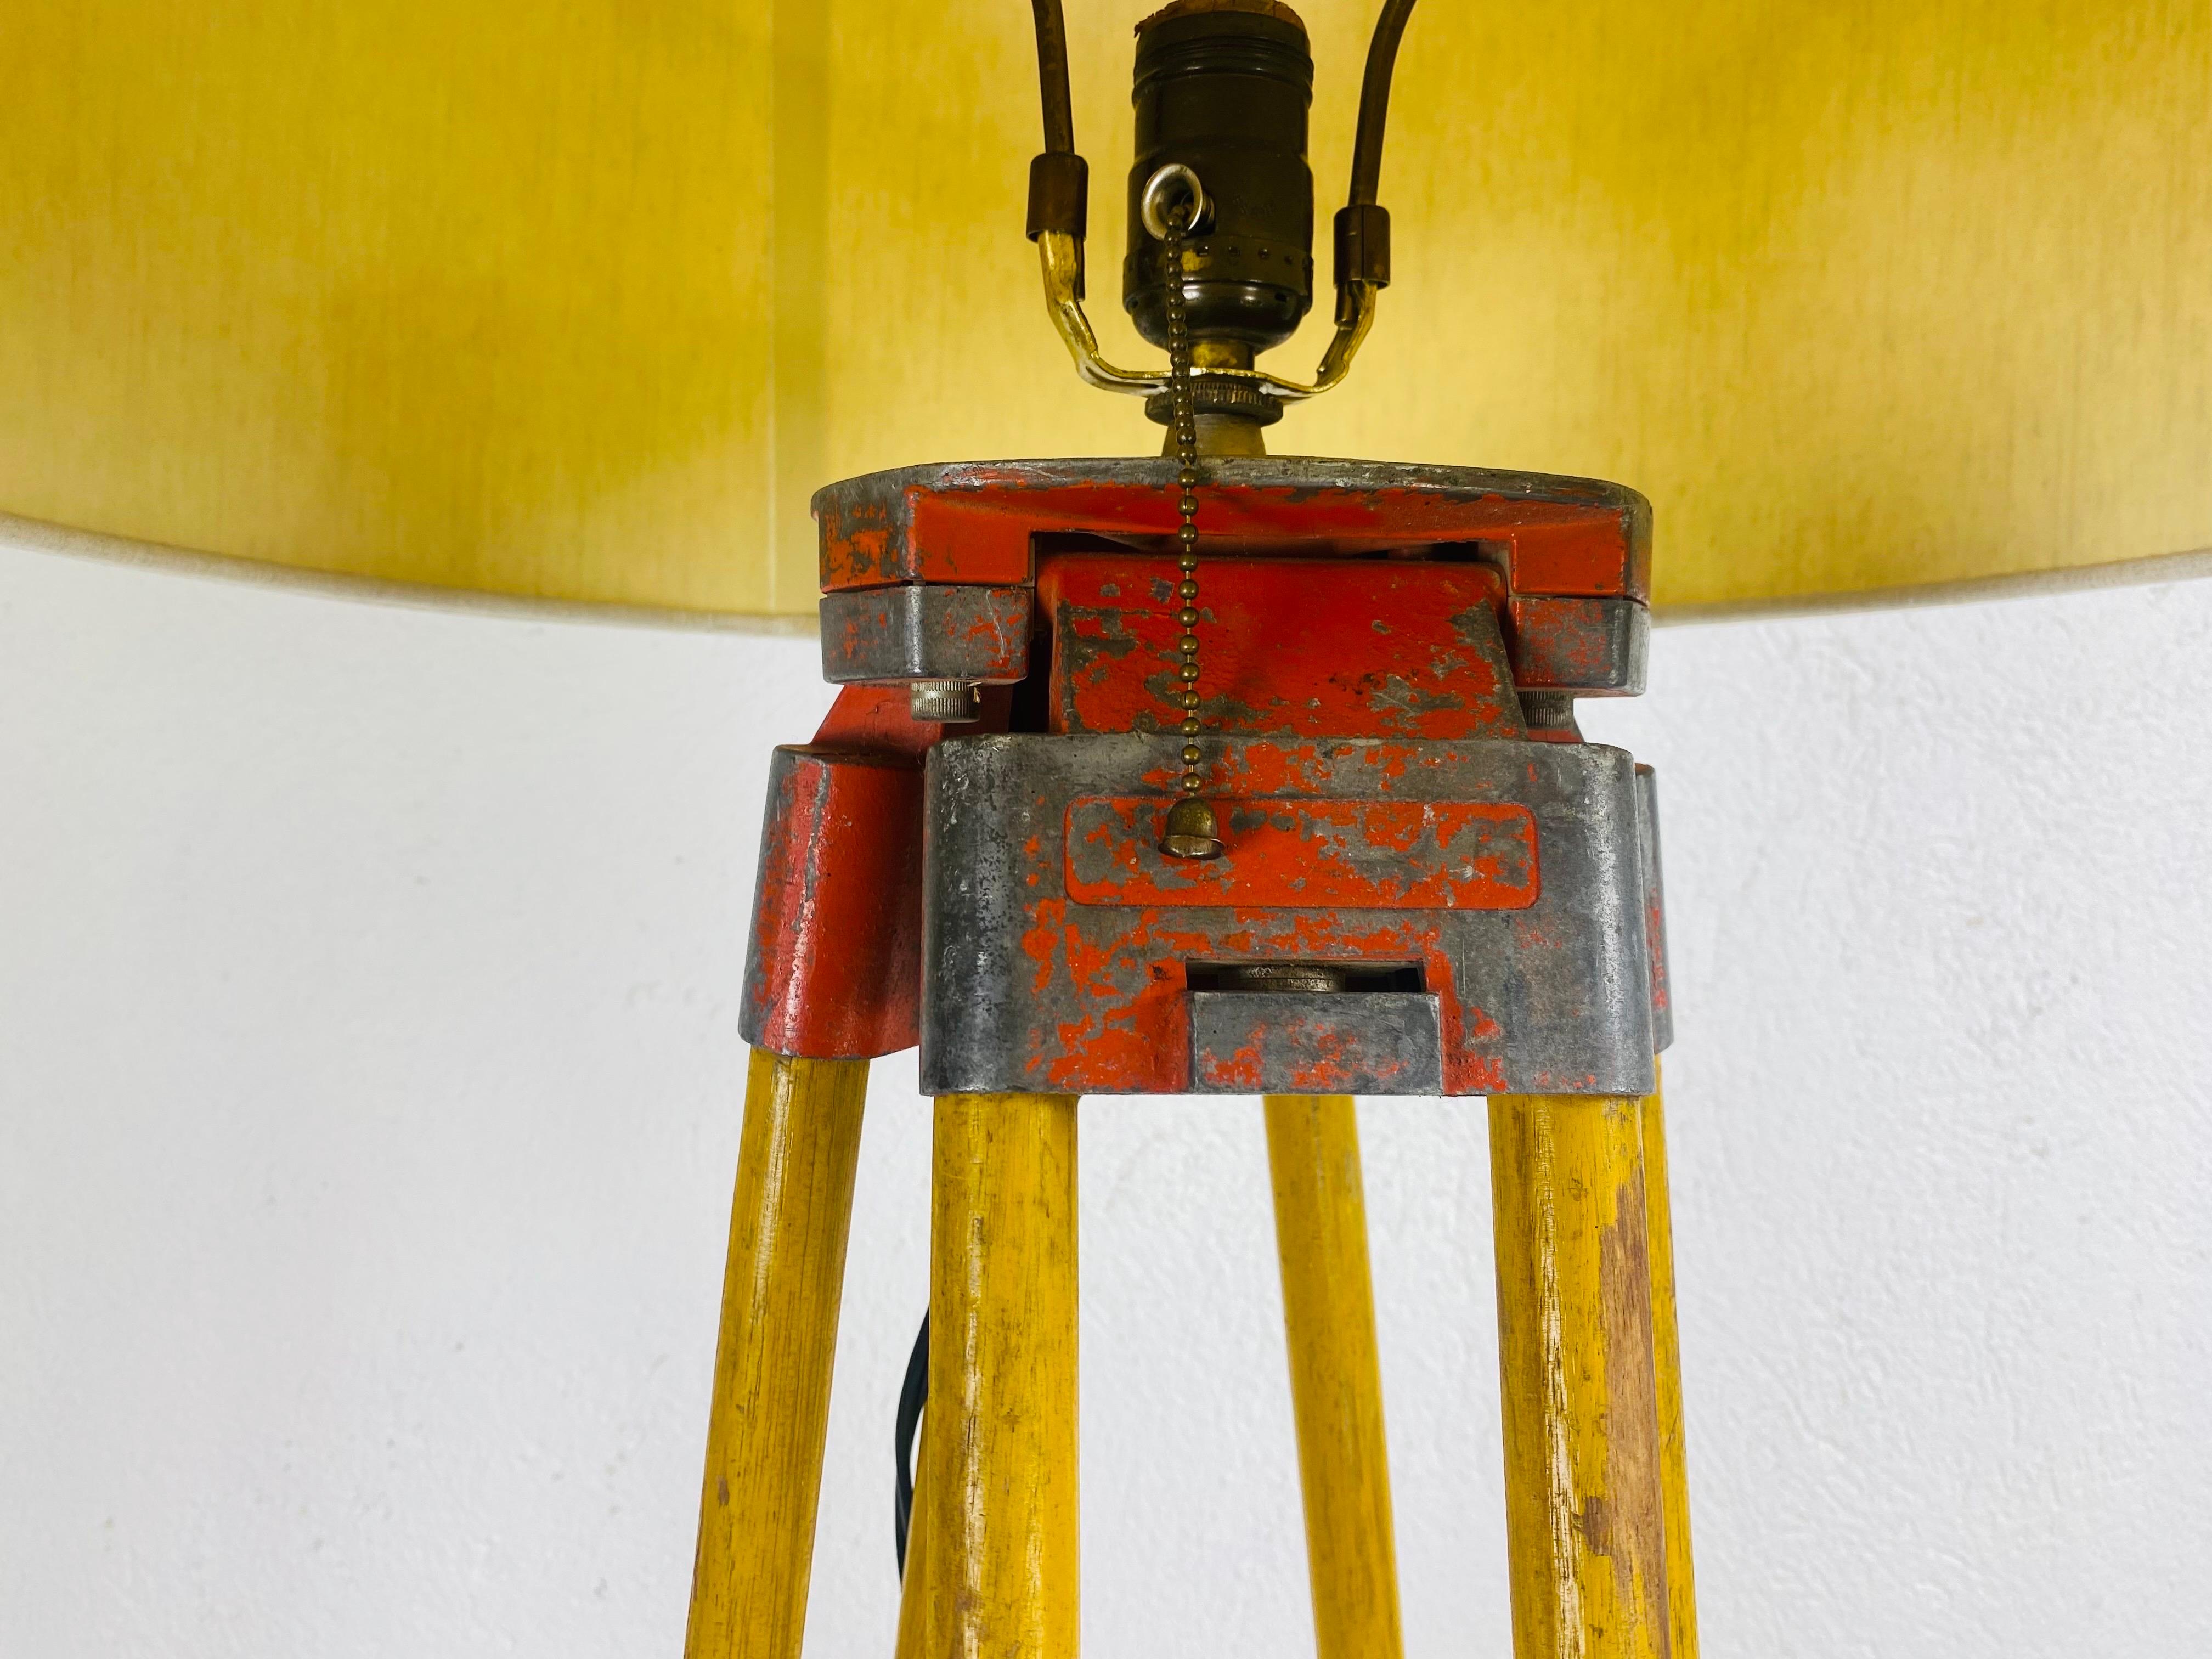 Hand-Painted Early 20th century rustic surveyors tripod floor lamp For Sale